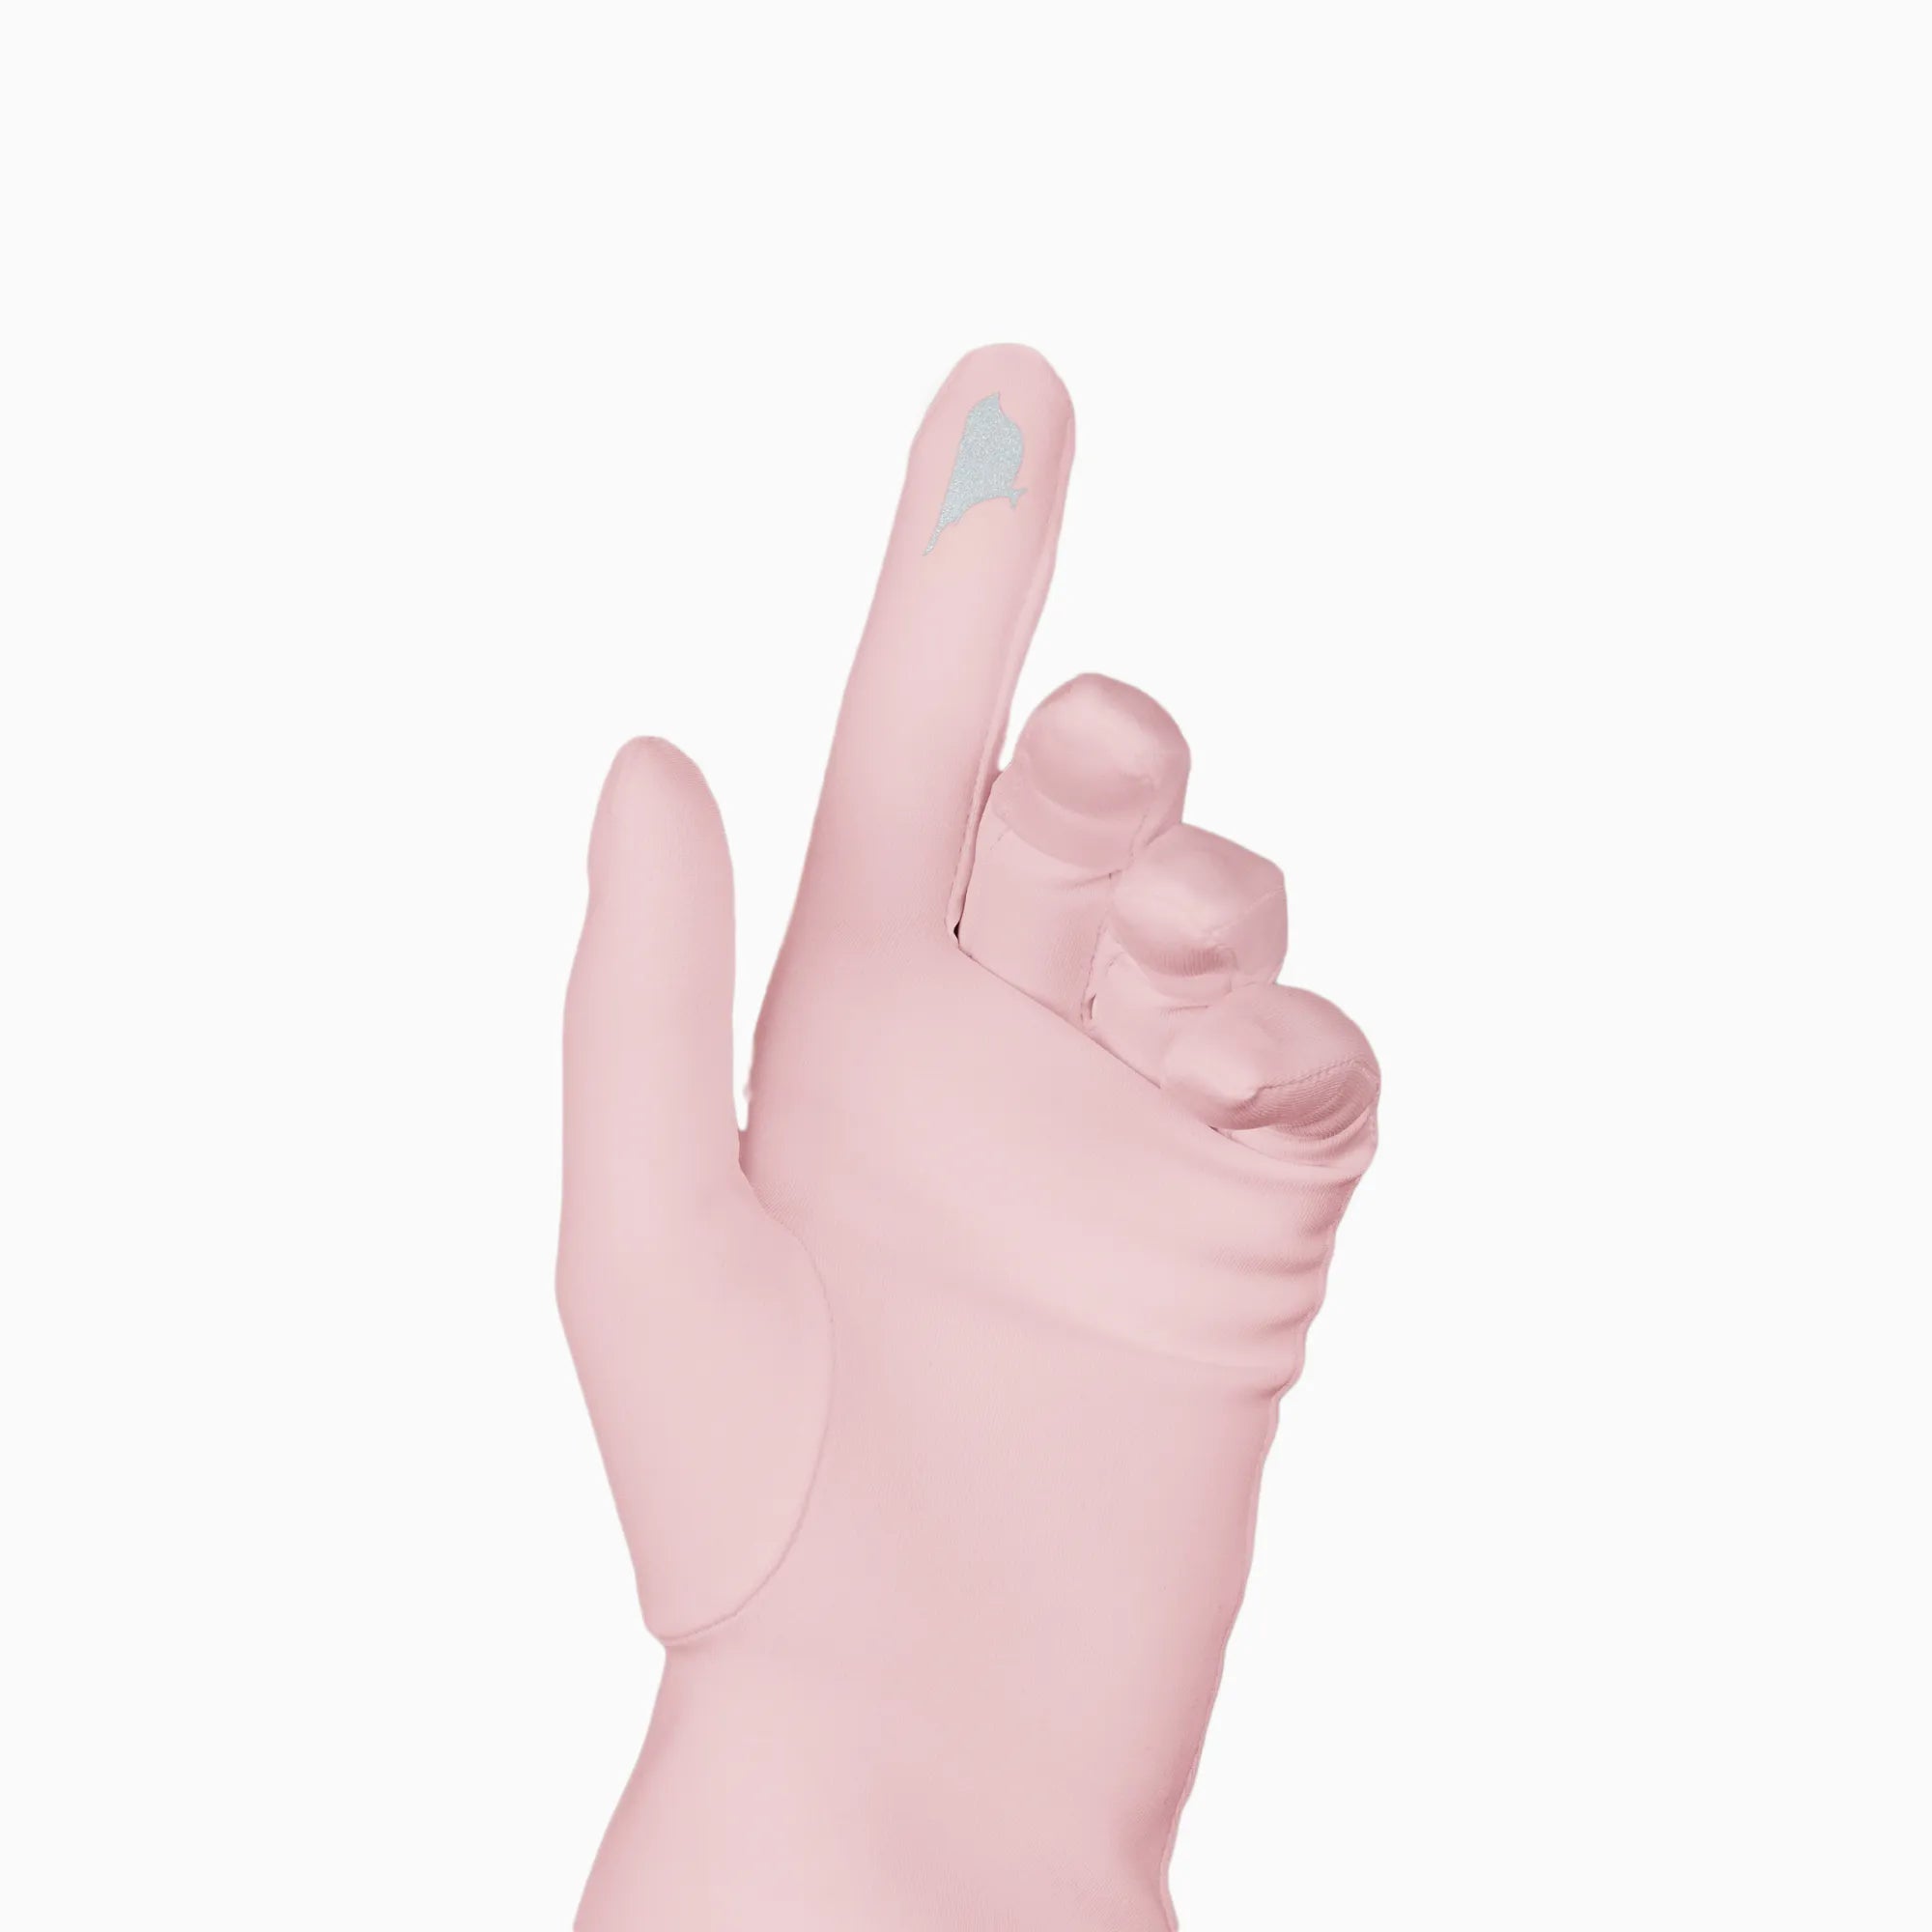 THE STEPHANIE touchscreen compatible tech friendly index finger.